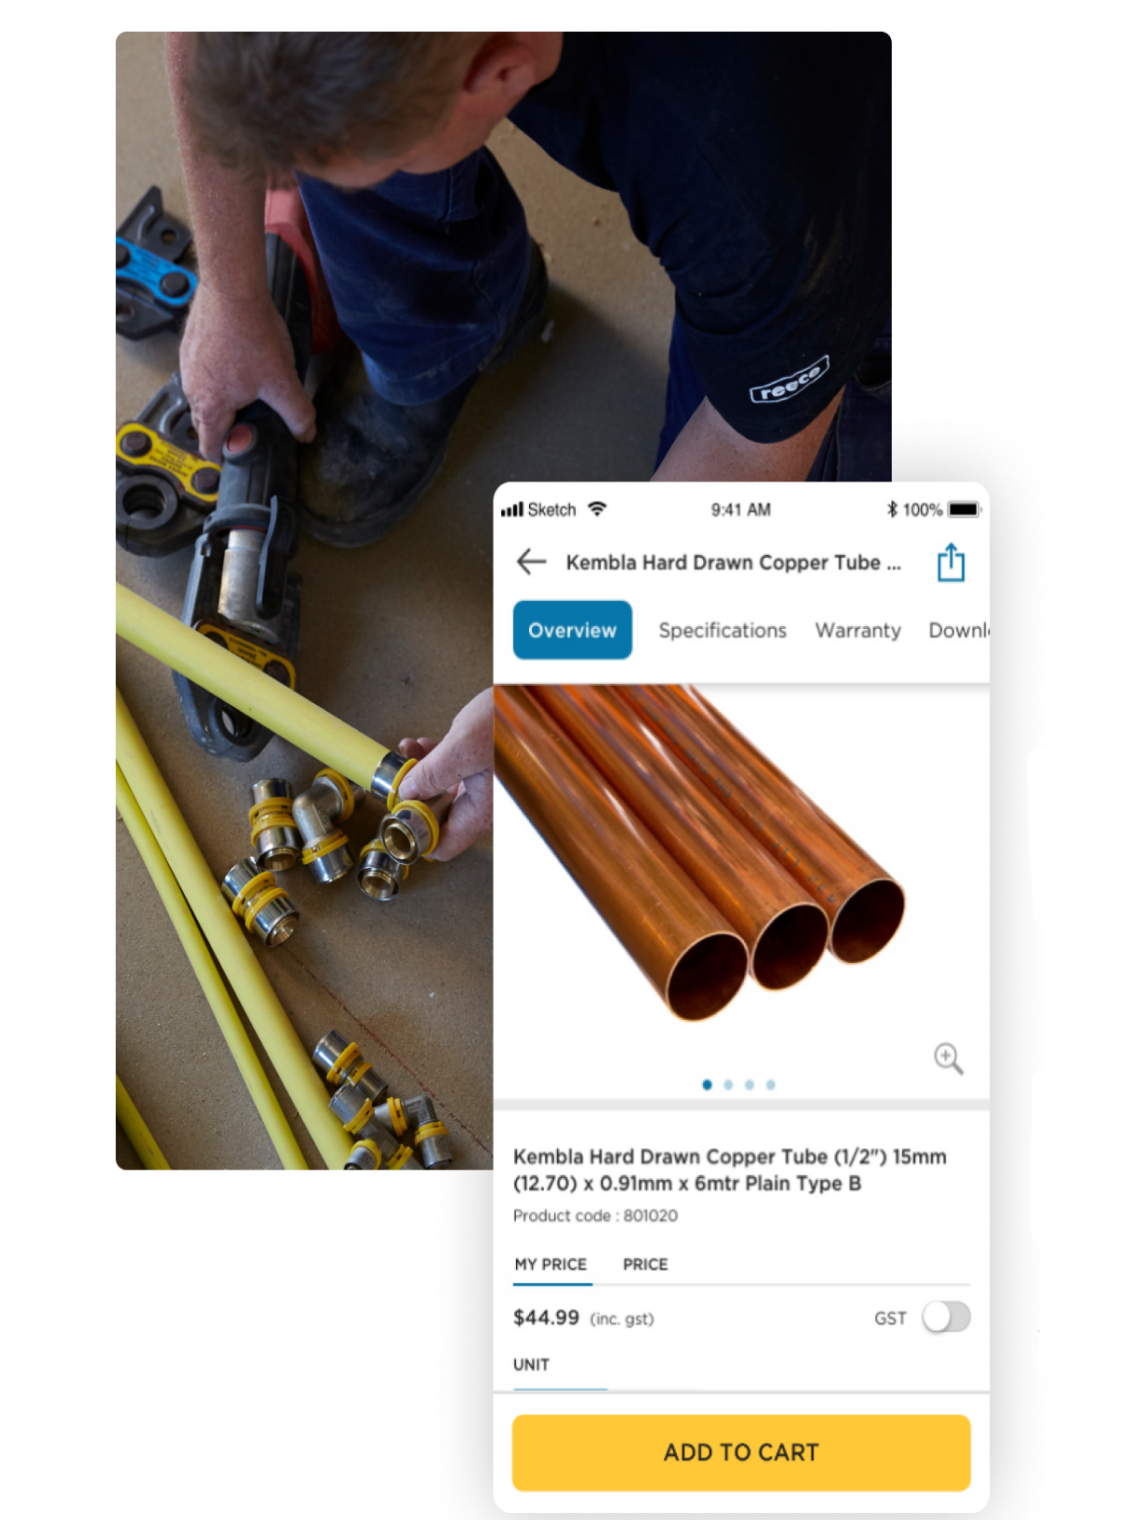 Product display page and image of man cutting pipes